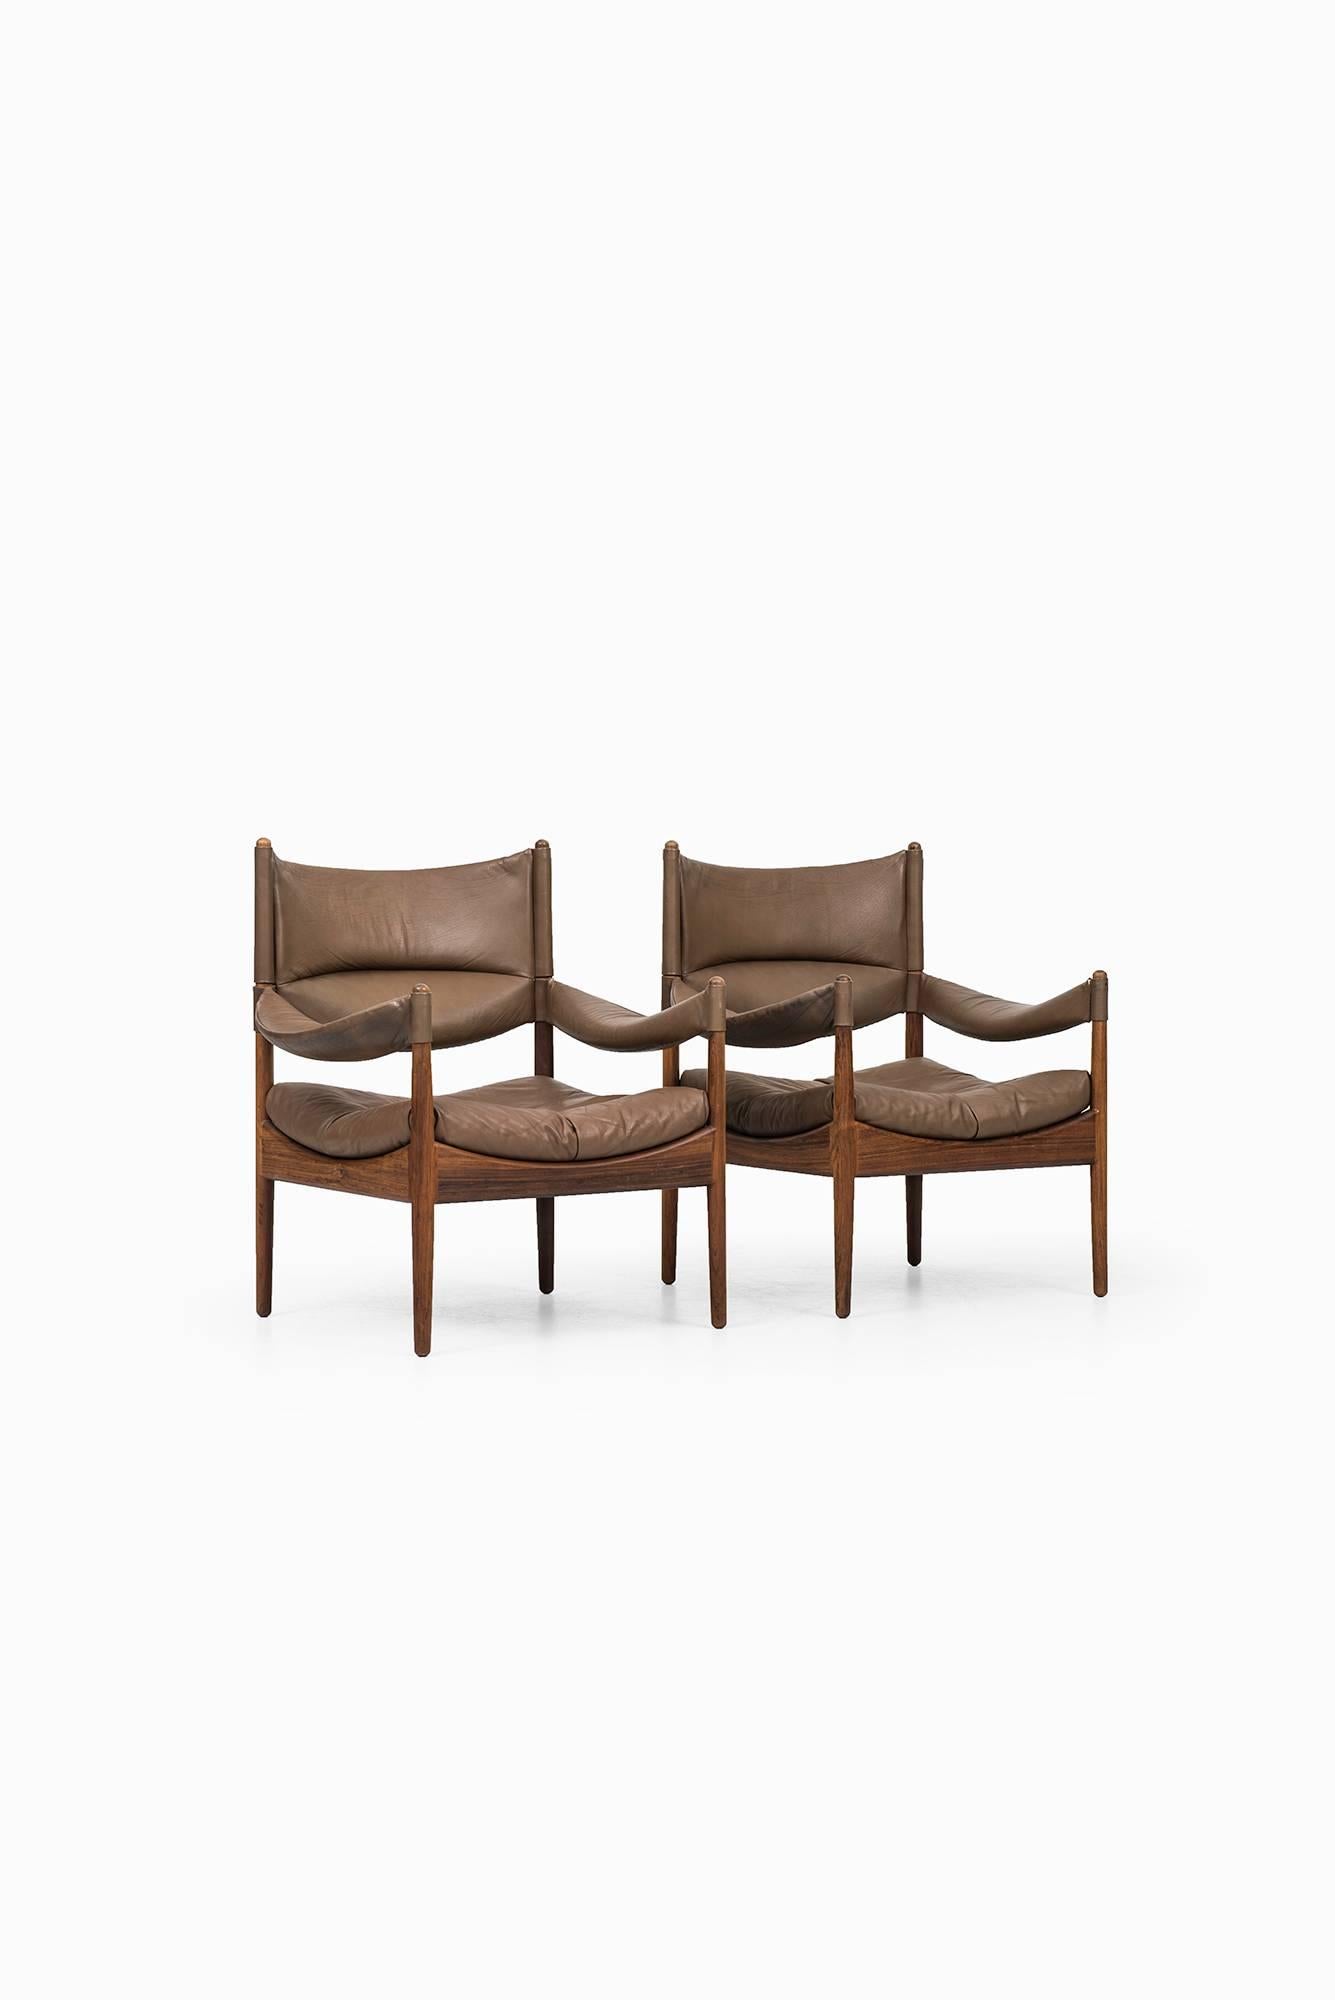 Rare seating group model Modus consists of four easy chairs and two tables designed by Kristian Solmer Vedel. Produced by Søren Willadsen møbelfabrik in Denmark.